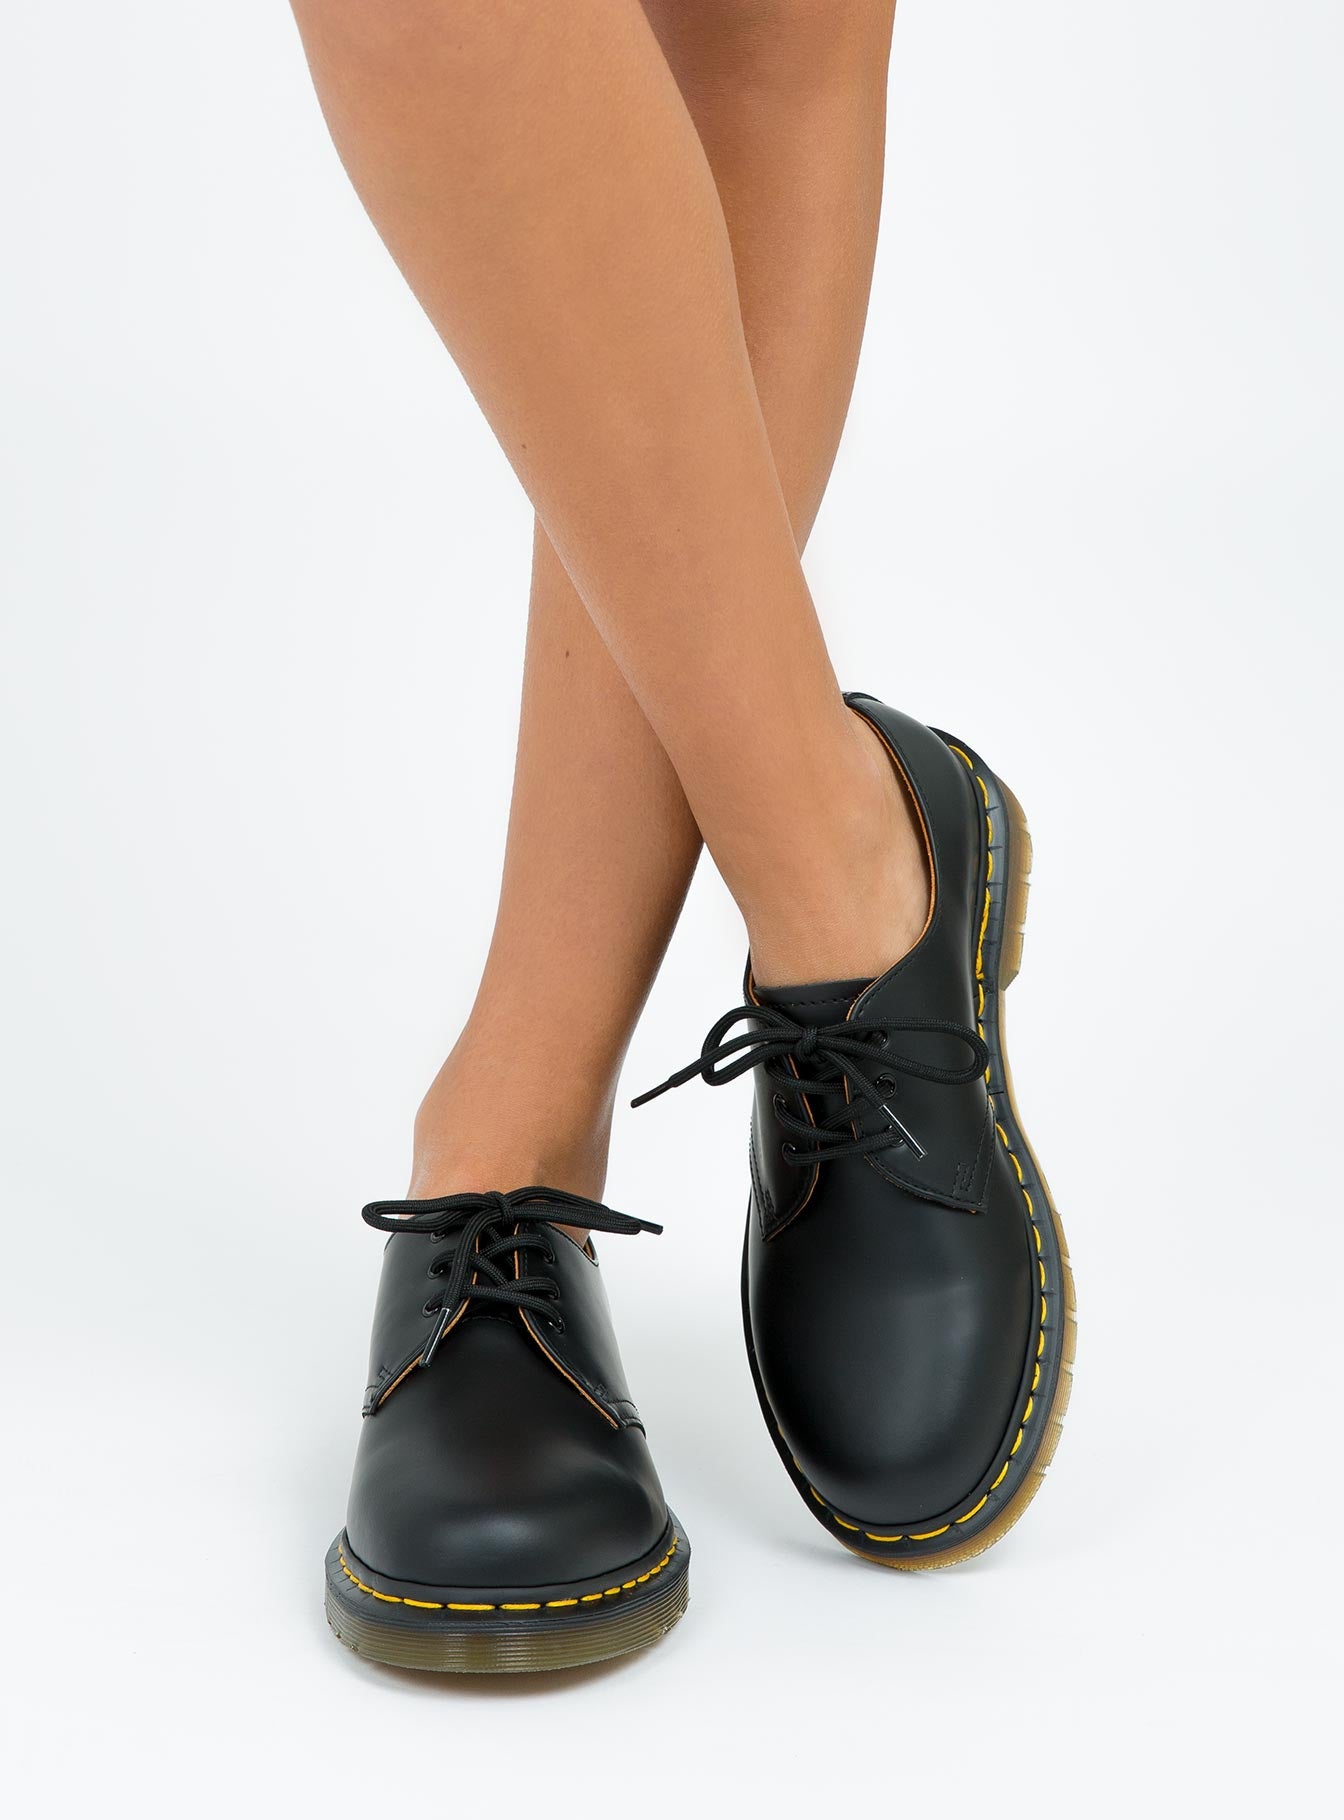 Dr. Martens 1461 Smooth Shoes